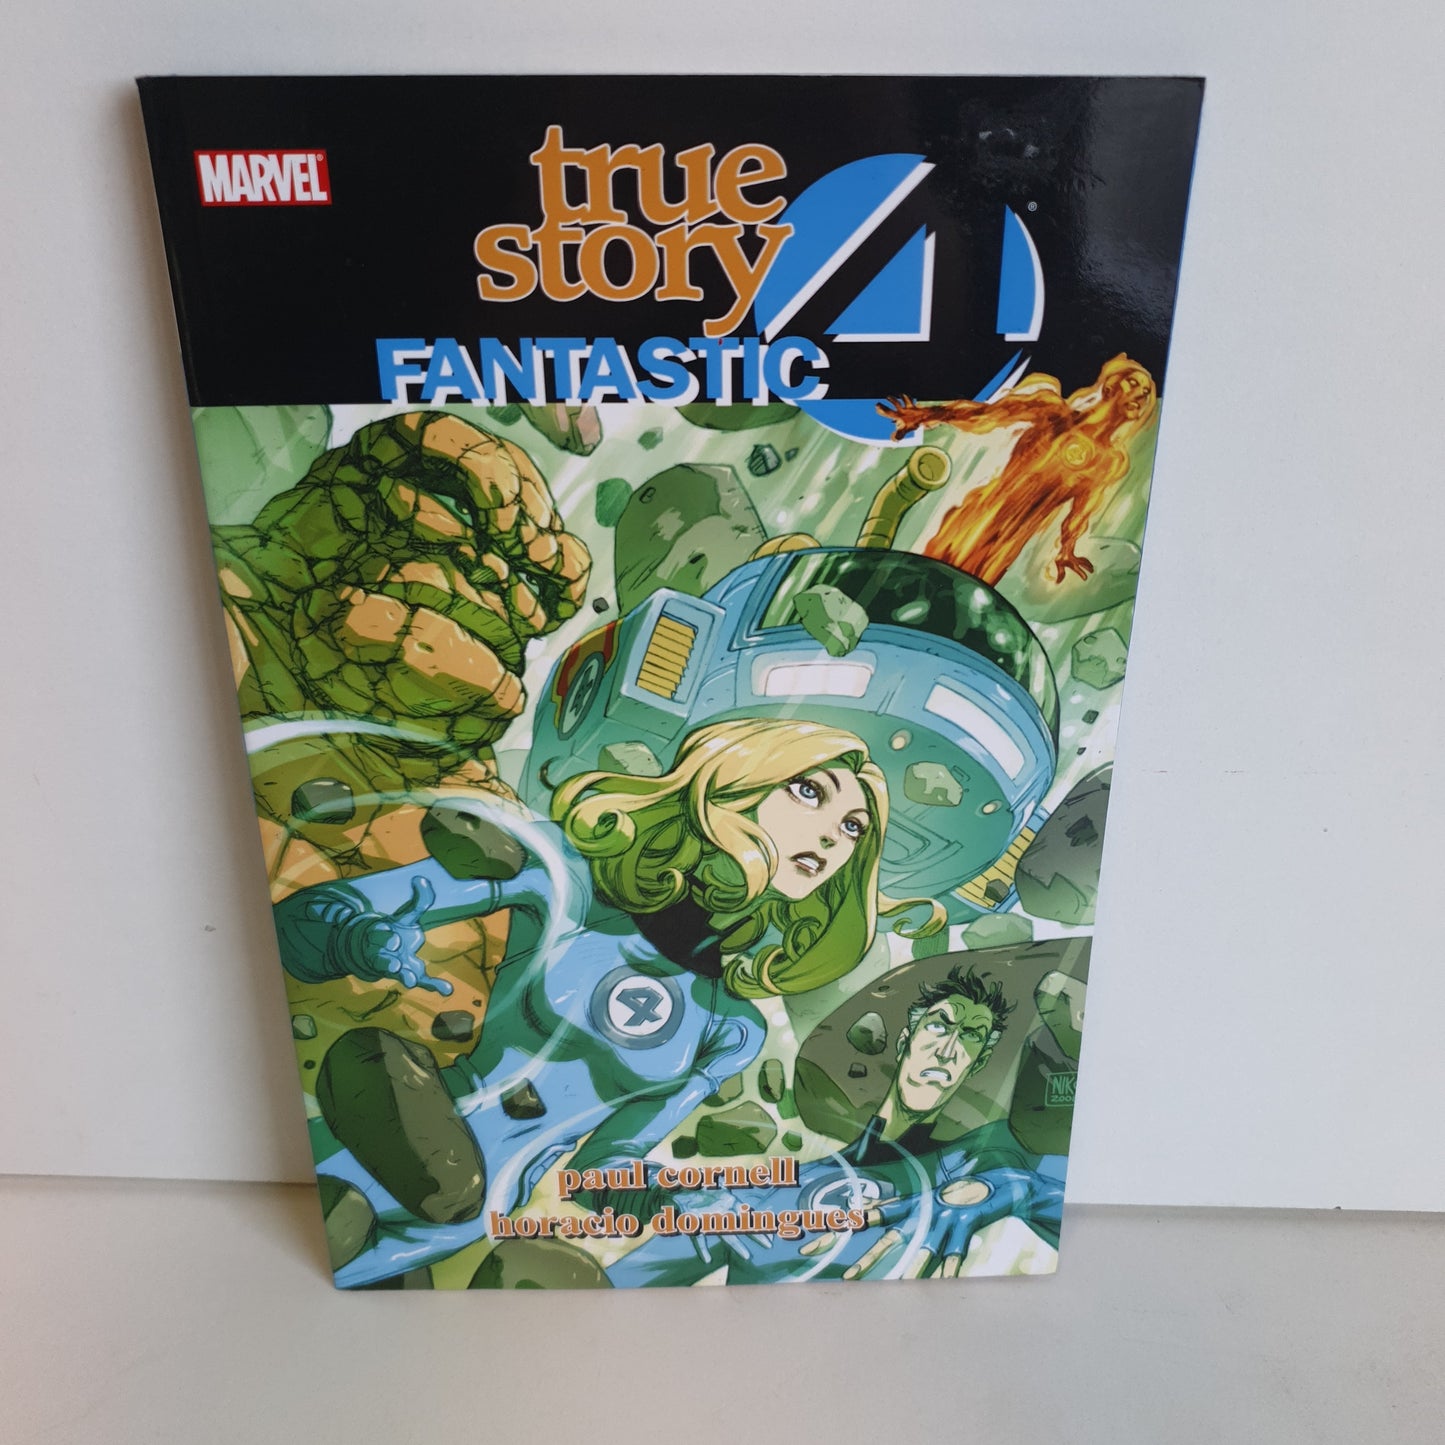 Fantastic Four True Story by Paul Cornell & Horacio Domingues (2009)